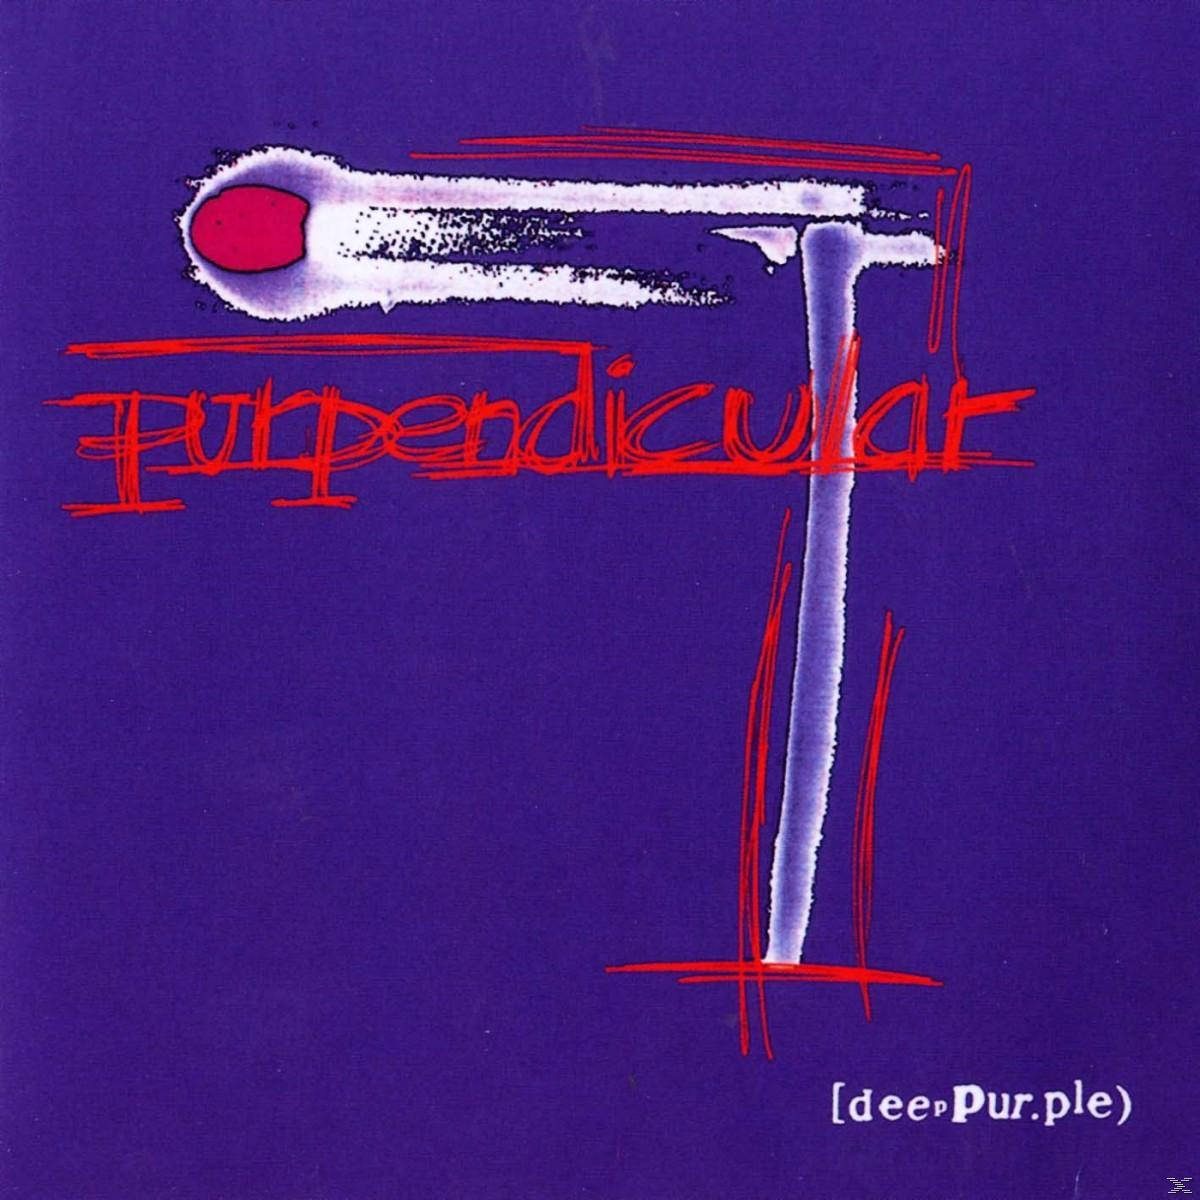 Deep - Version) (CD) (Expanded Purpendicular Purple -